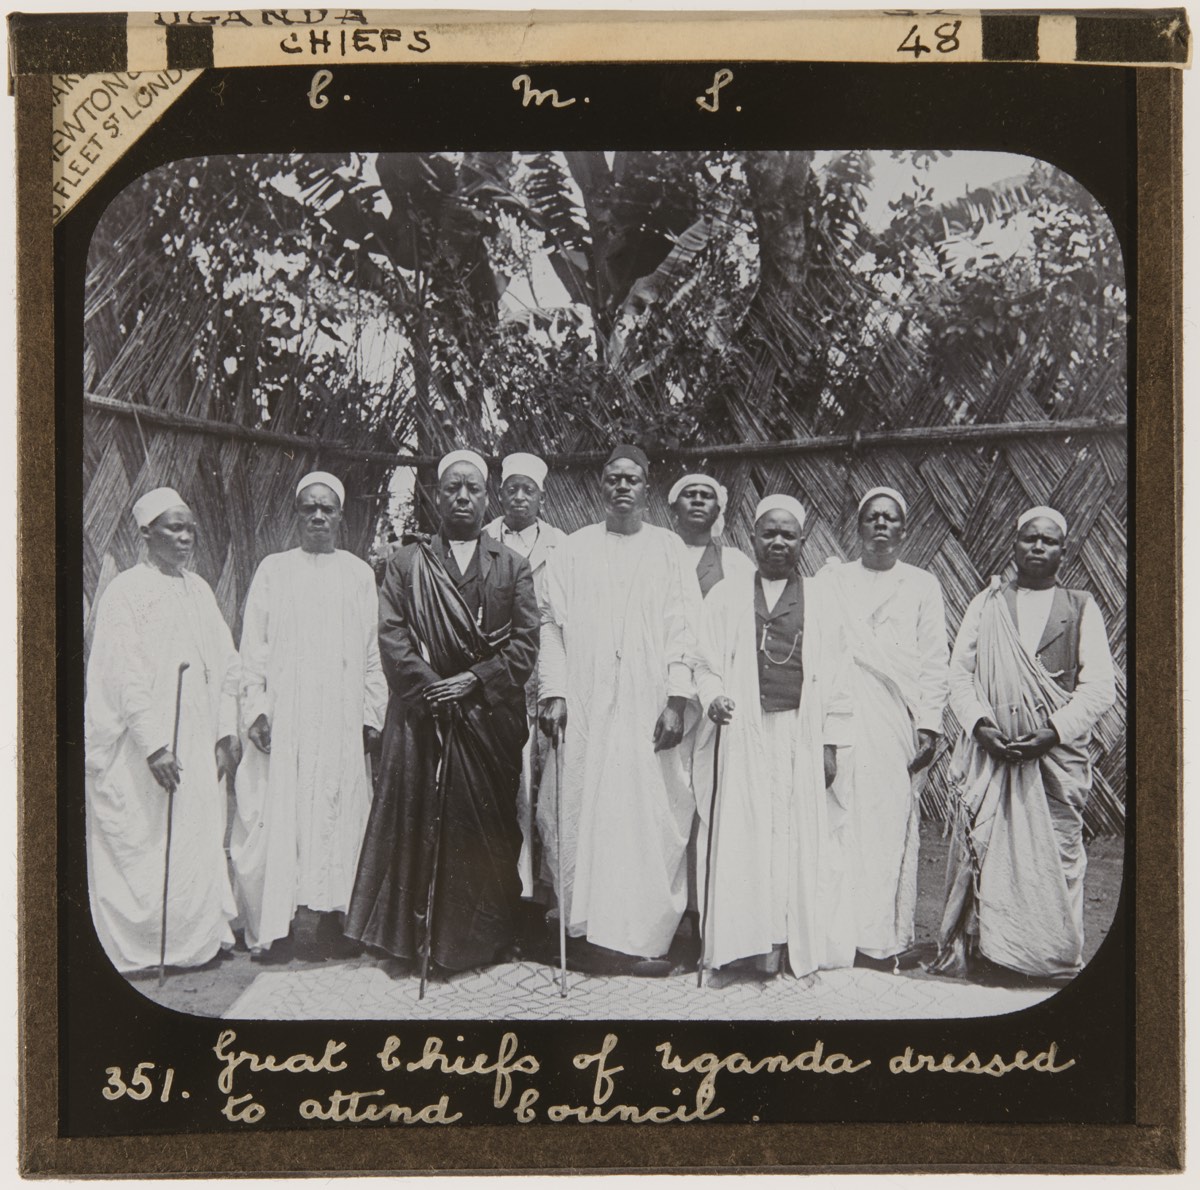 Black and white group portrait of dignitaries and chiefs, mostly in white clothing and one in black. Photograph mounted on a photo slide, with 'Great chiefs of Uganda dressed to attend council. 351' handwritten at the base.